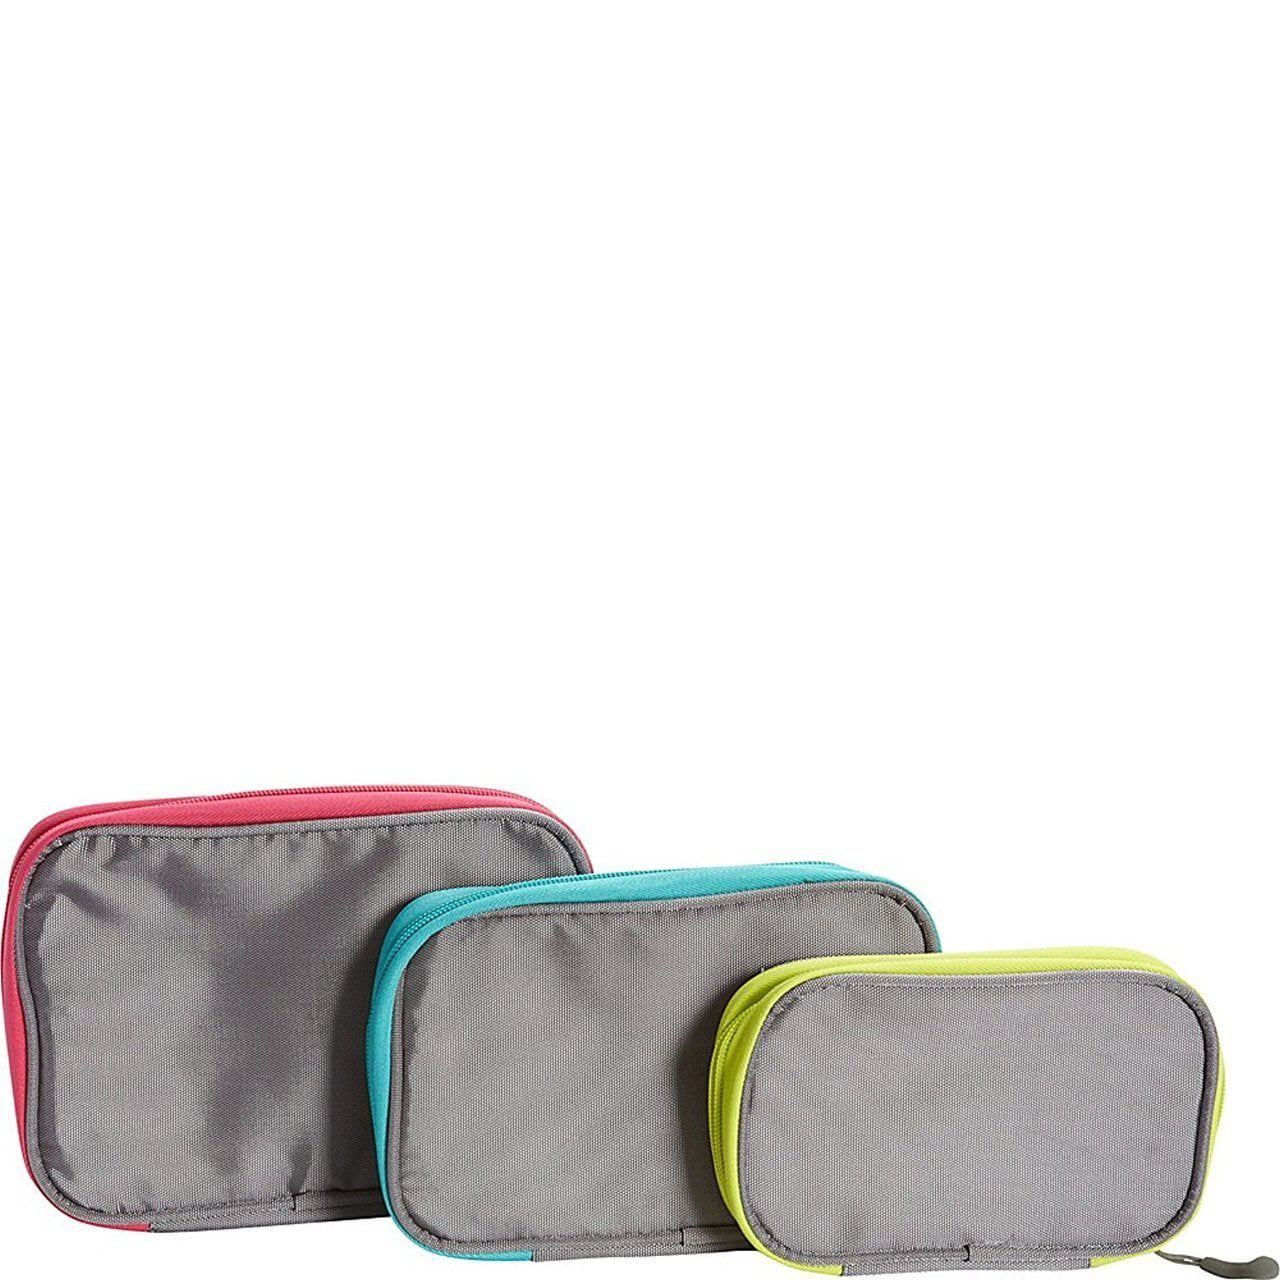 Bolds Travelon Lightweight 3-Piece Packing Squares One Size 